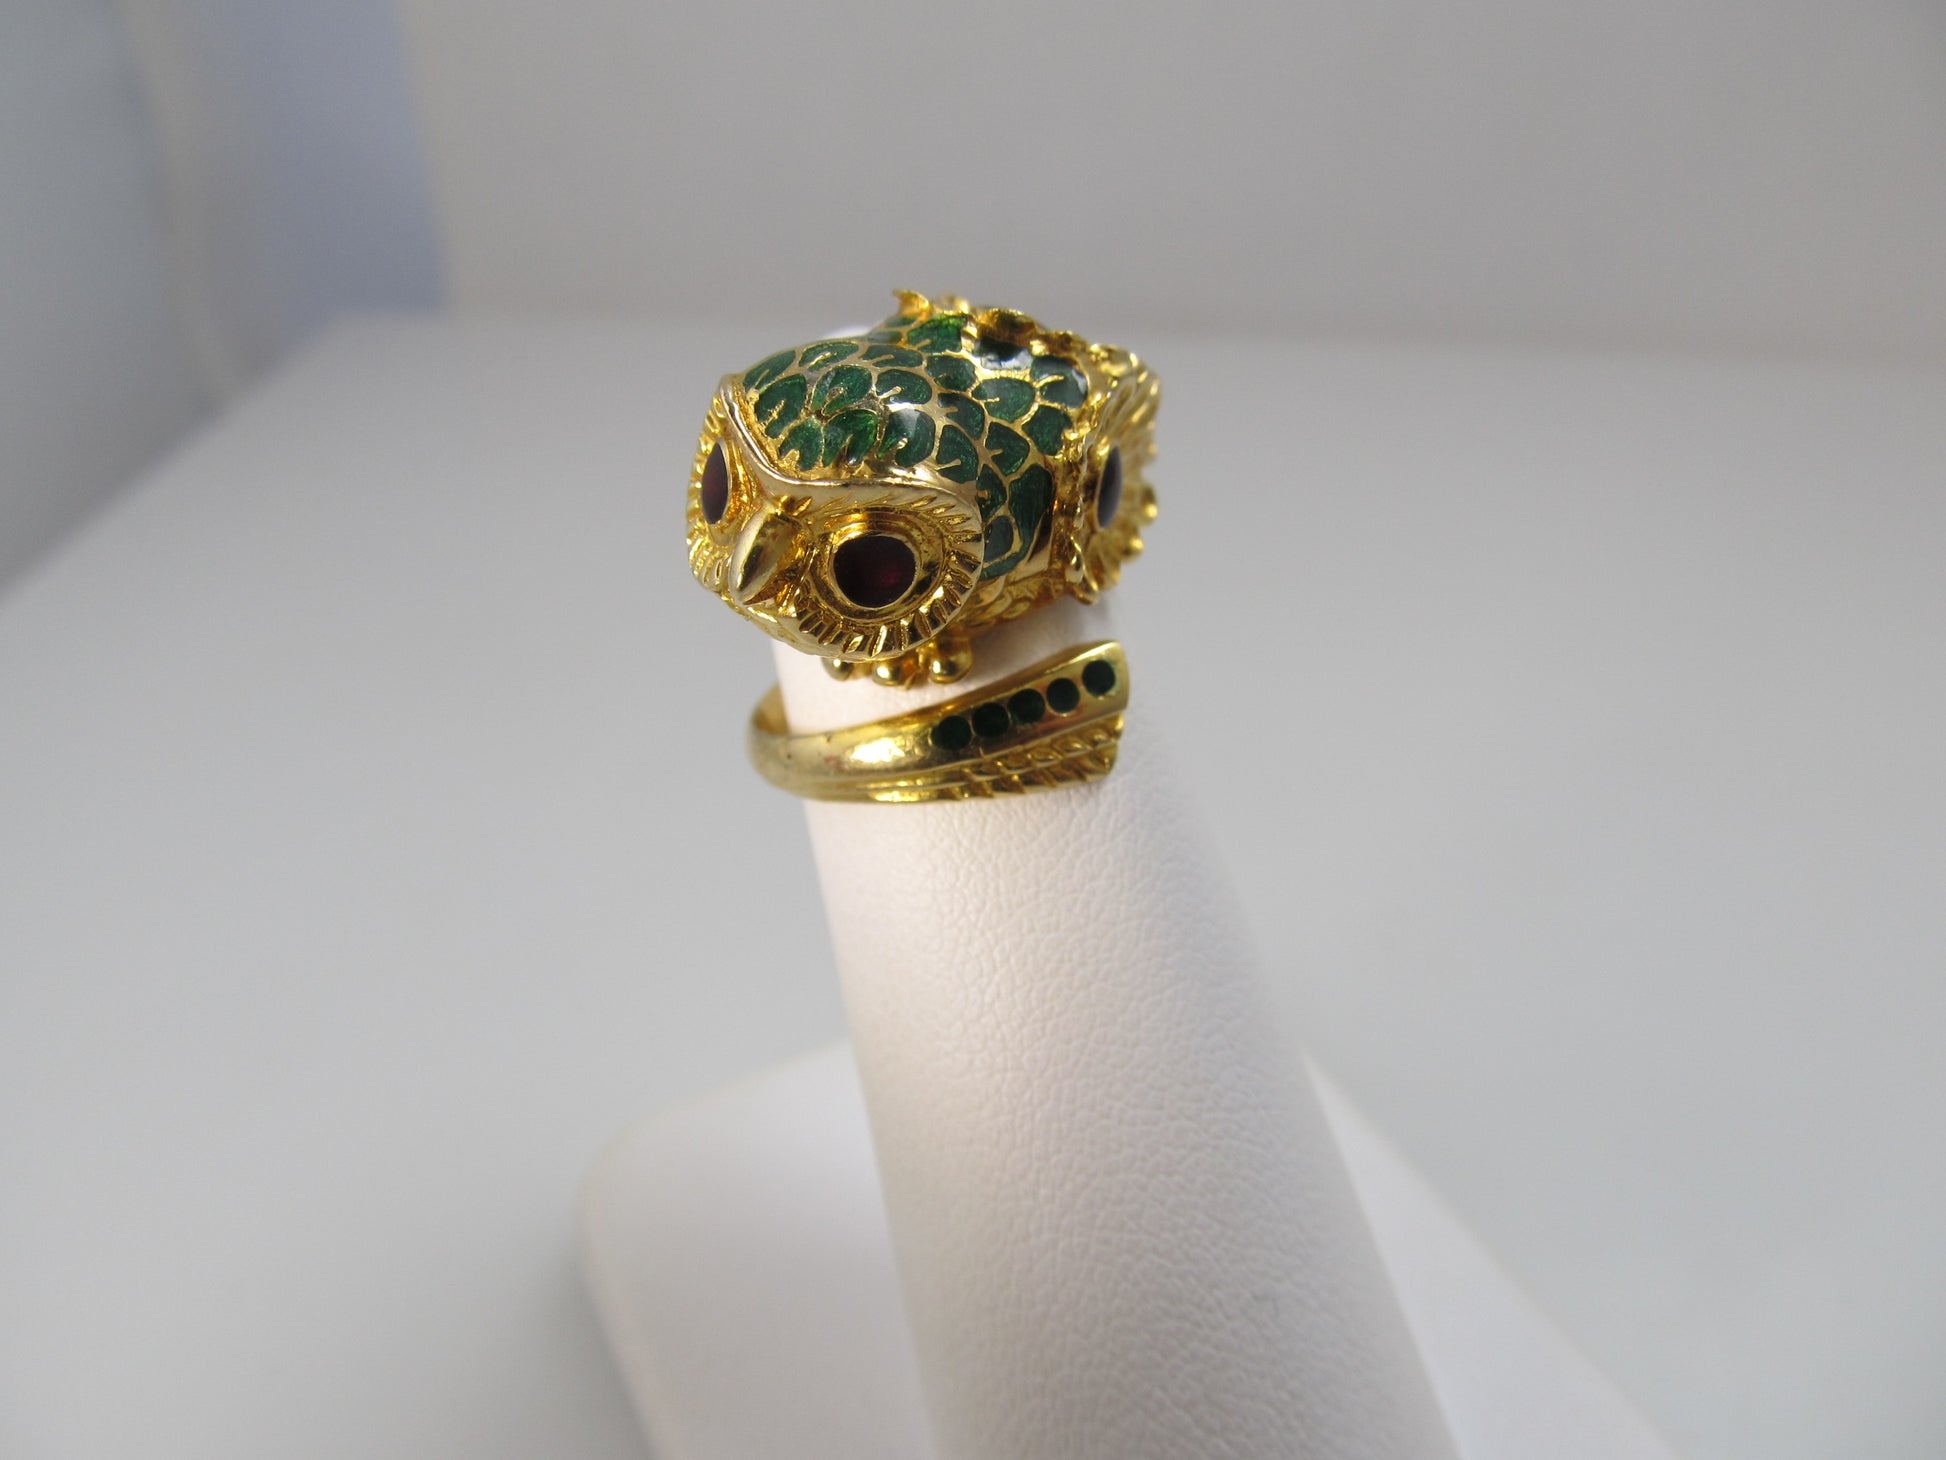 Love! Vintage owl ring, 18k yellow gold with enamel – Victorious